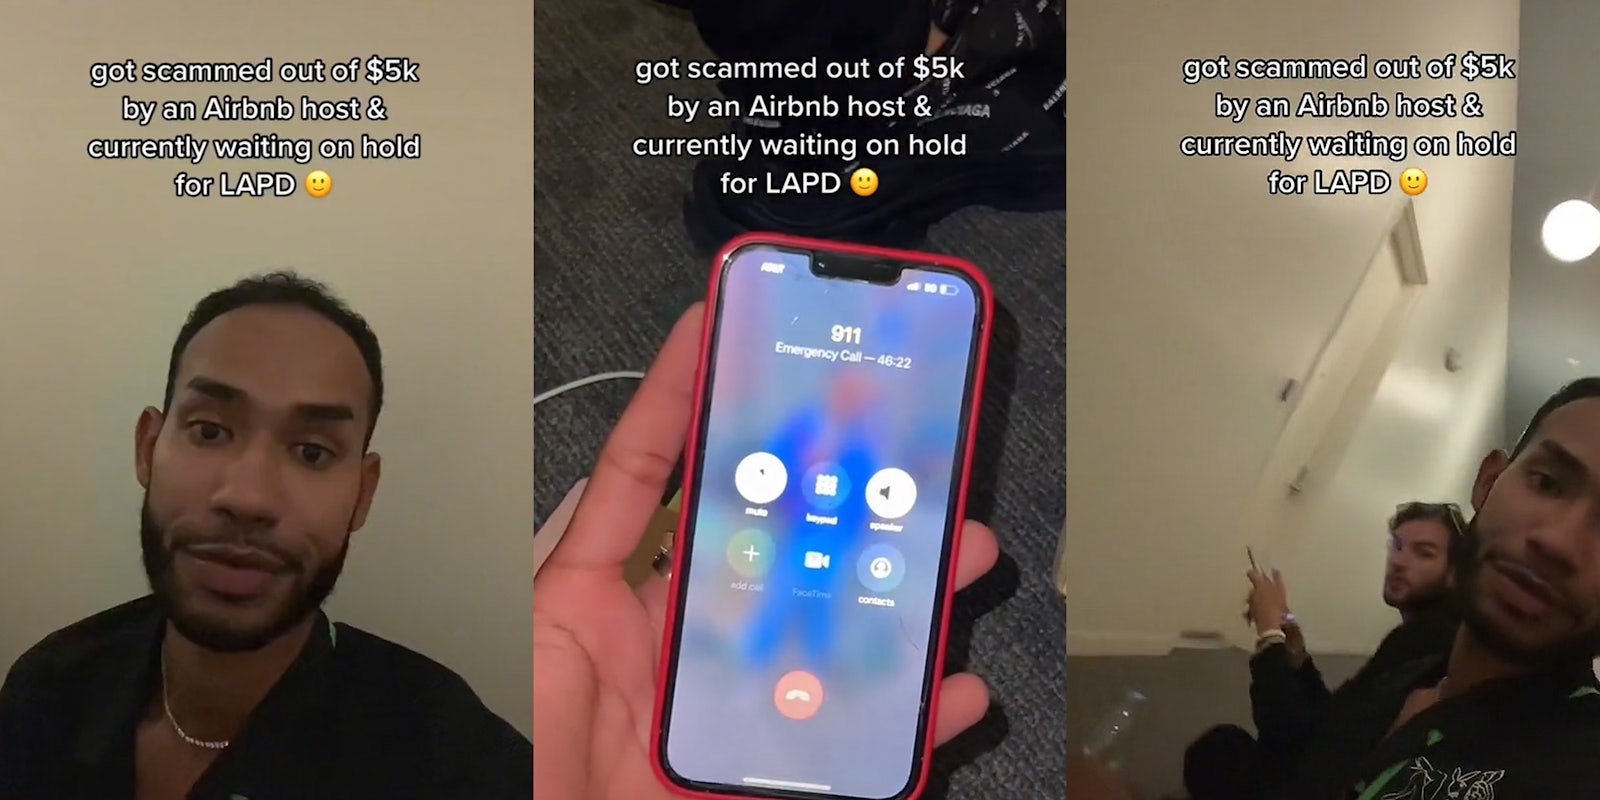 man in hallway caption 'got scammed out of $5k by an Airbnb host & currently waiting on hold for LAPD' (l) man holding phone calling 911 caption 'got scammed out of $5k by an Airbnb host & currently waiting on hold for LAPD' (c) man and other man in hallway waiting caption 'got scammed out of $5k by an Airbnb host & currently waiting on hold for LAPD' (r)